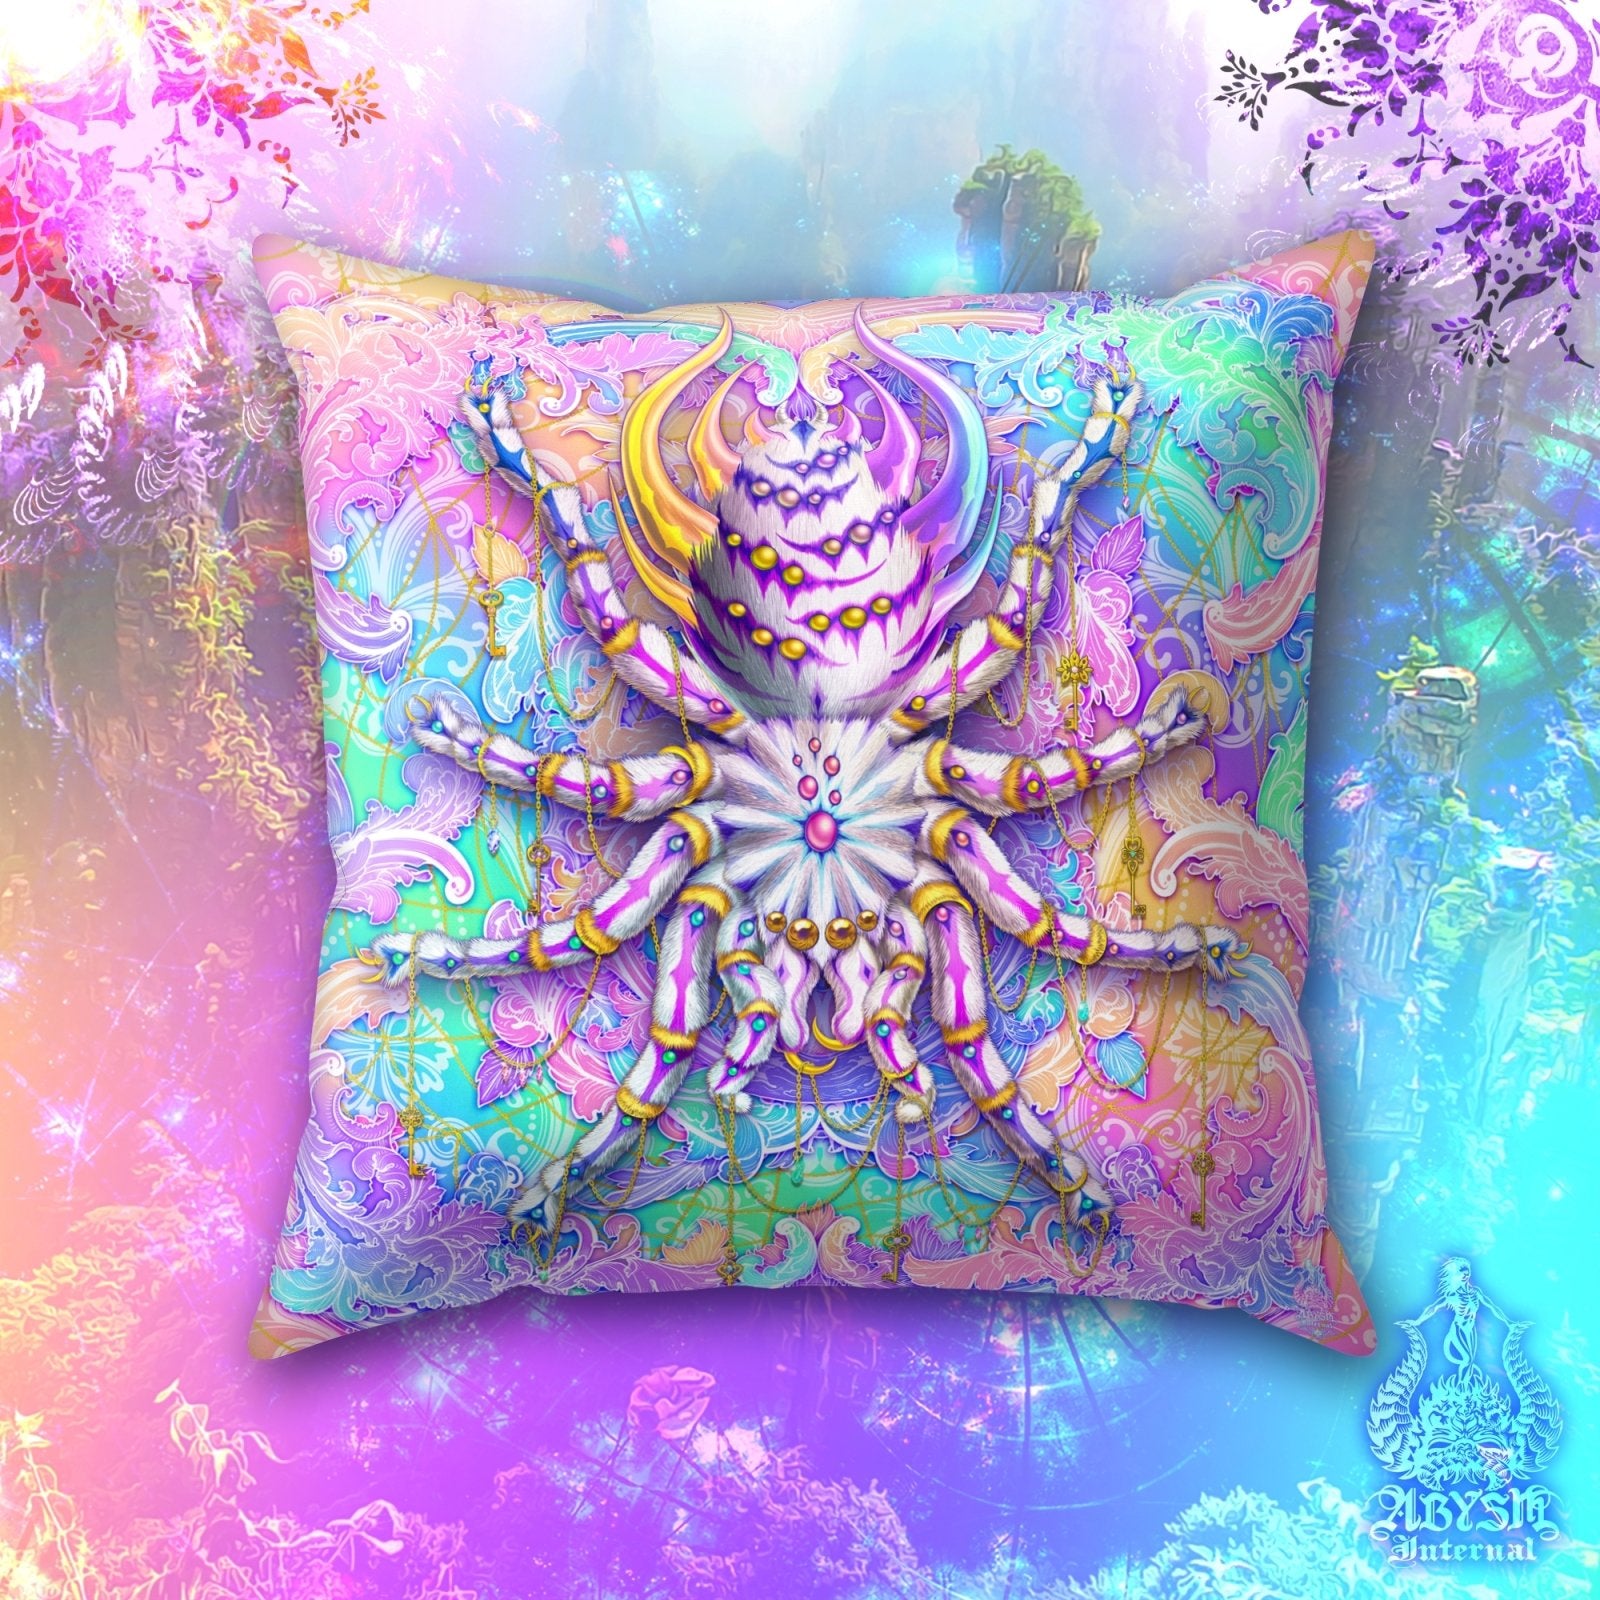 Aesthetic Throw Pillow, Decorative Accent Cushion, Holographic Pastel Room Decor, Funky and Eclectic Home - Tarantula, Psychedelic Art, Spider - Abysm Internal